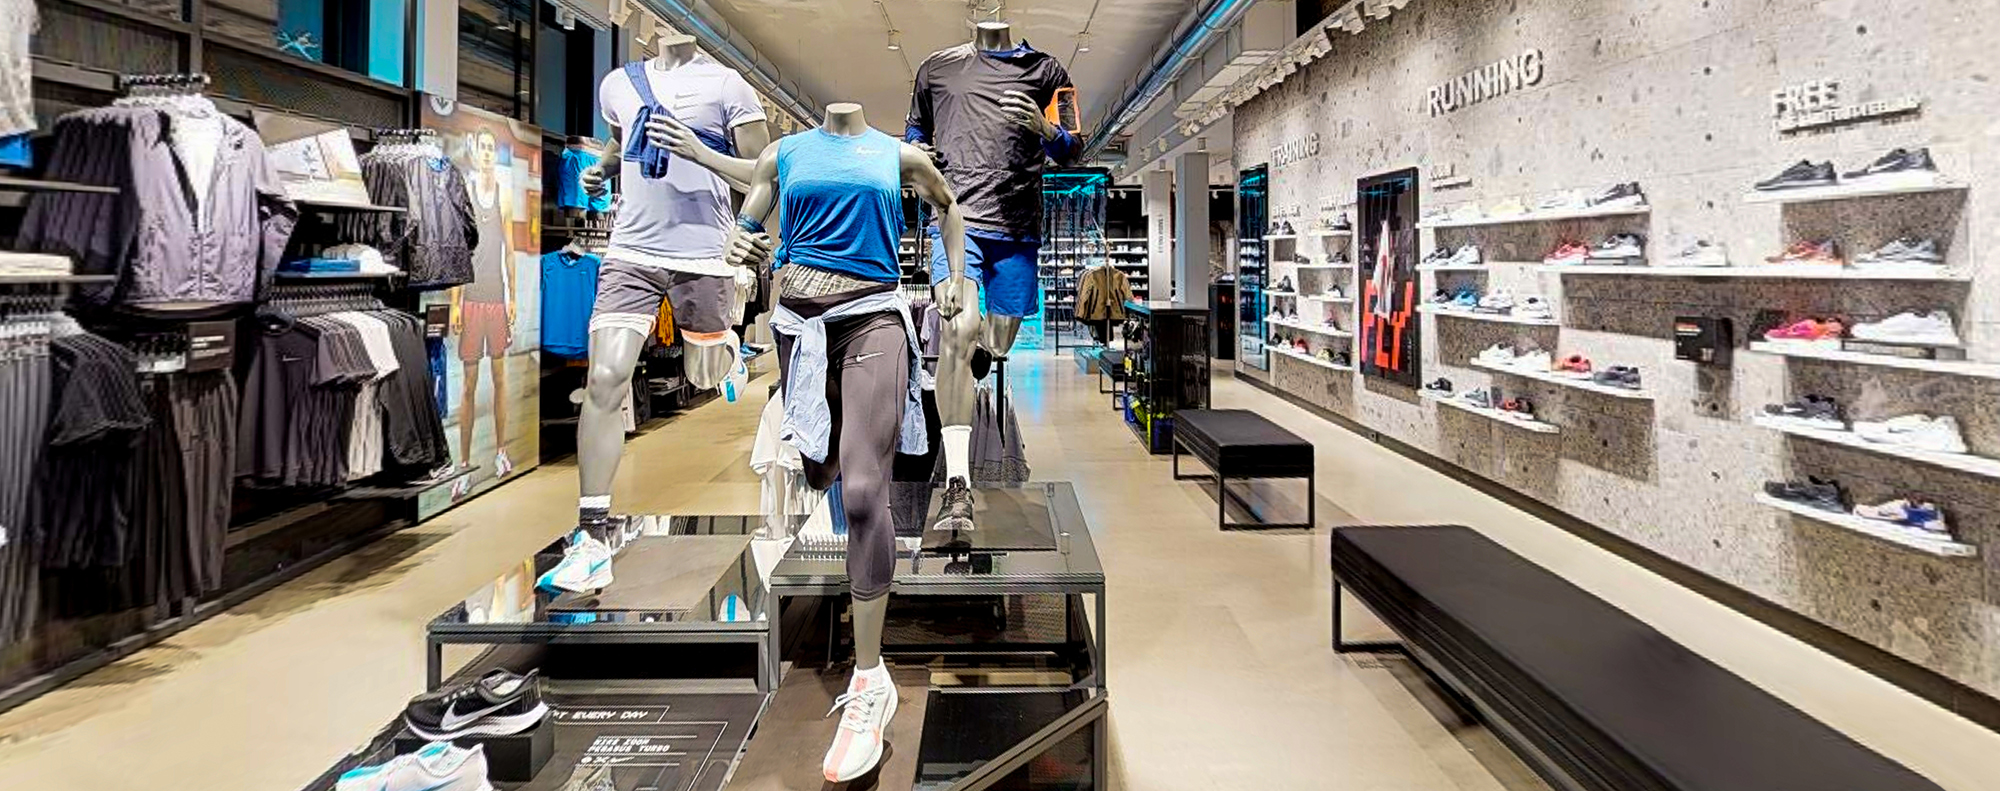 Retail store featuring running and sports apparel